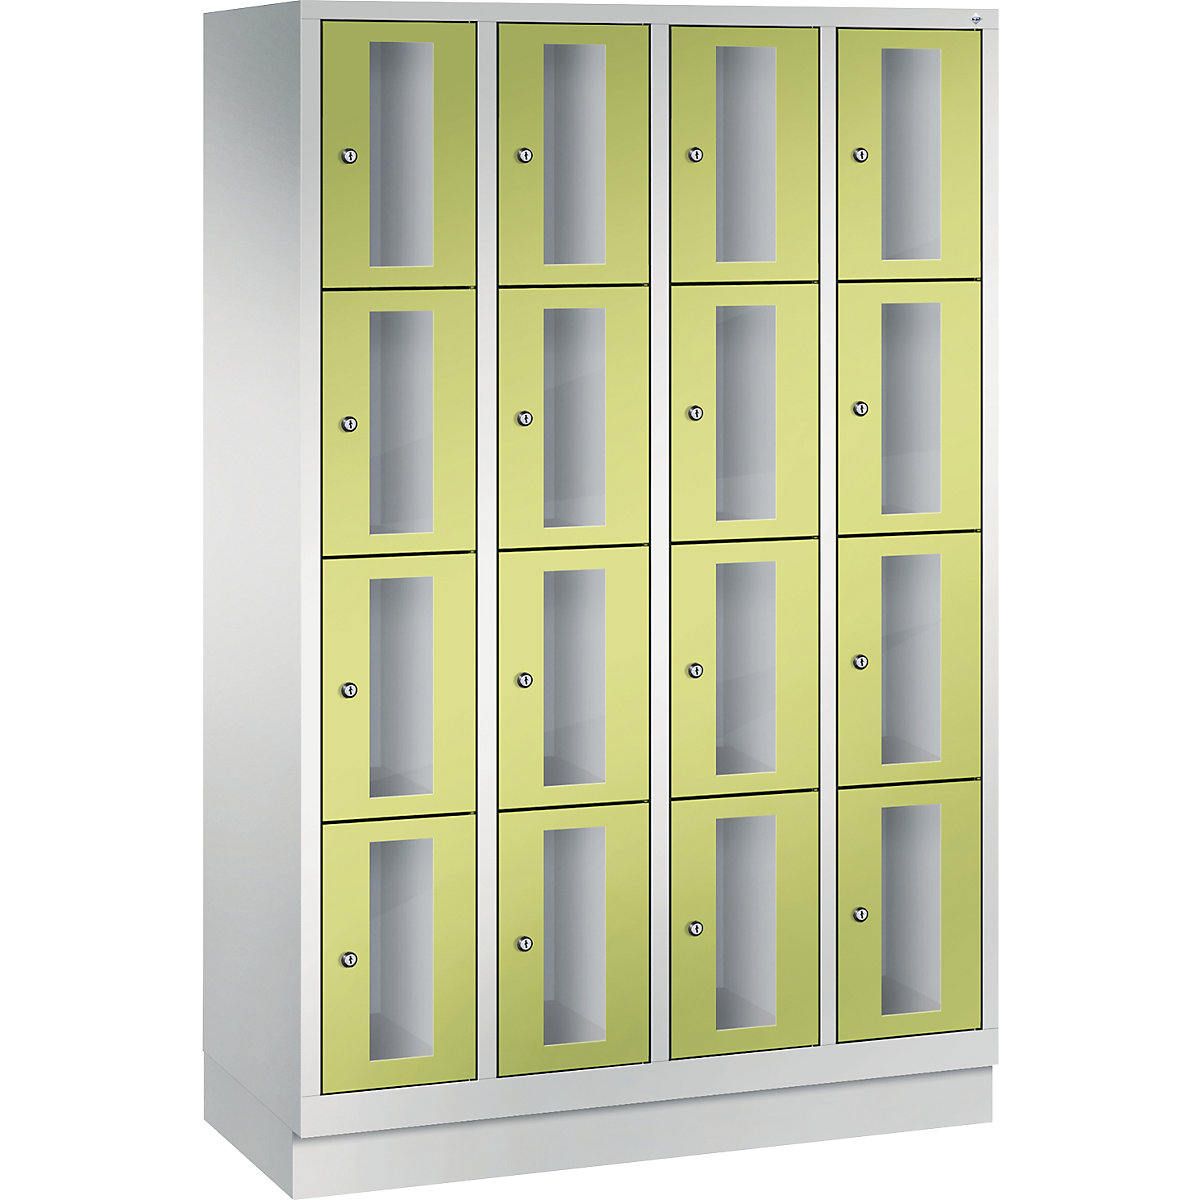 C+P – CLASSIC locker unit, compartment height 375 mm, with plinth, 16 compartments, width 1190 mm, viridian green door